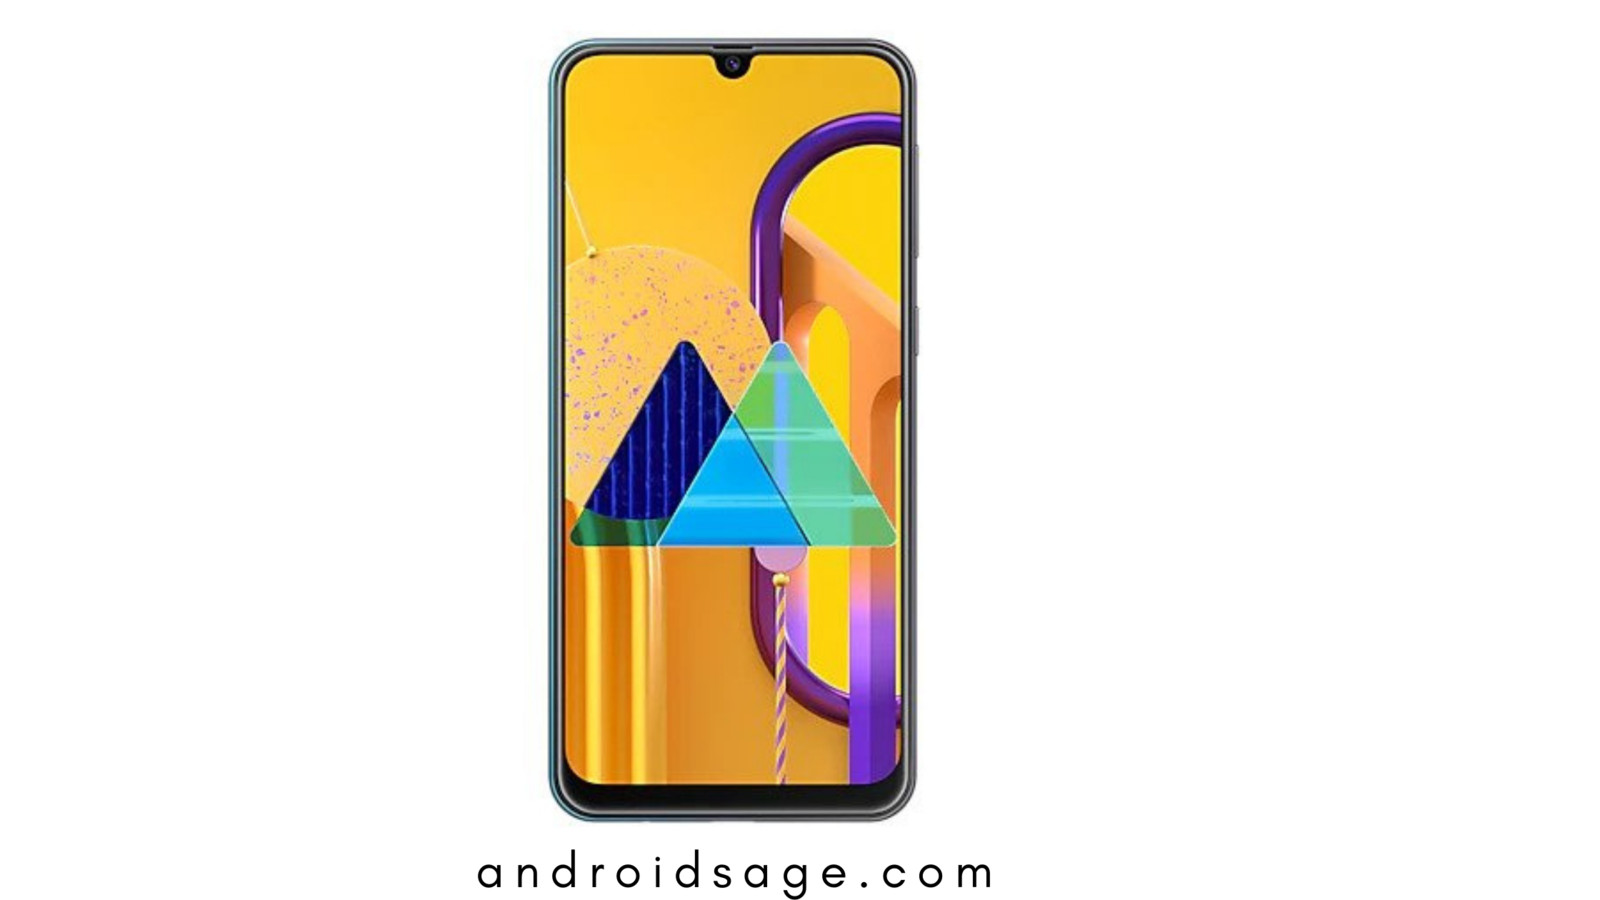 Samsung Galaxy M30s Android 11 update with One UI 3